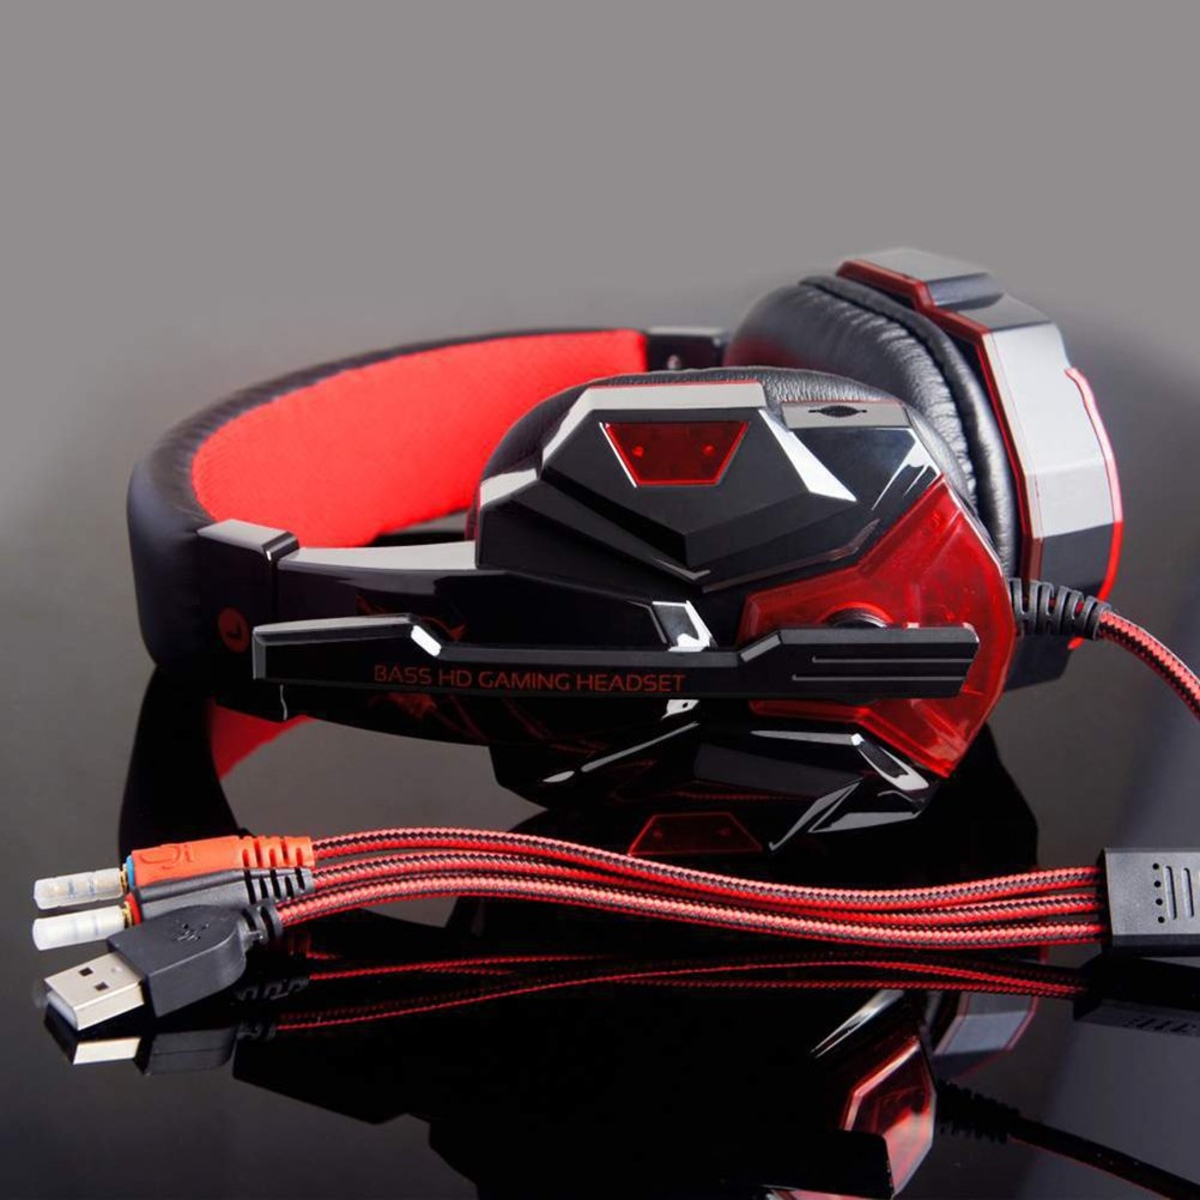 how-to-plug-in-and-set-up-a-pt780-bass-hd-gaming-headset